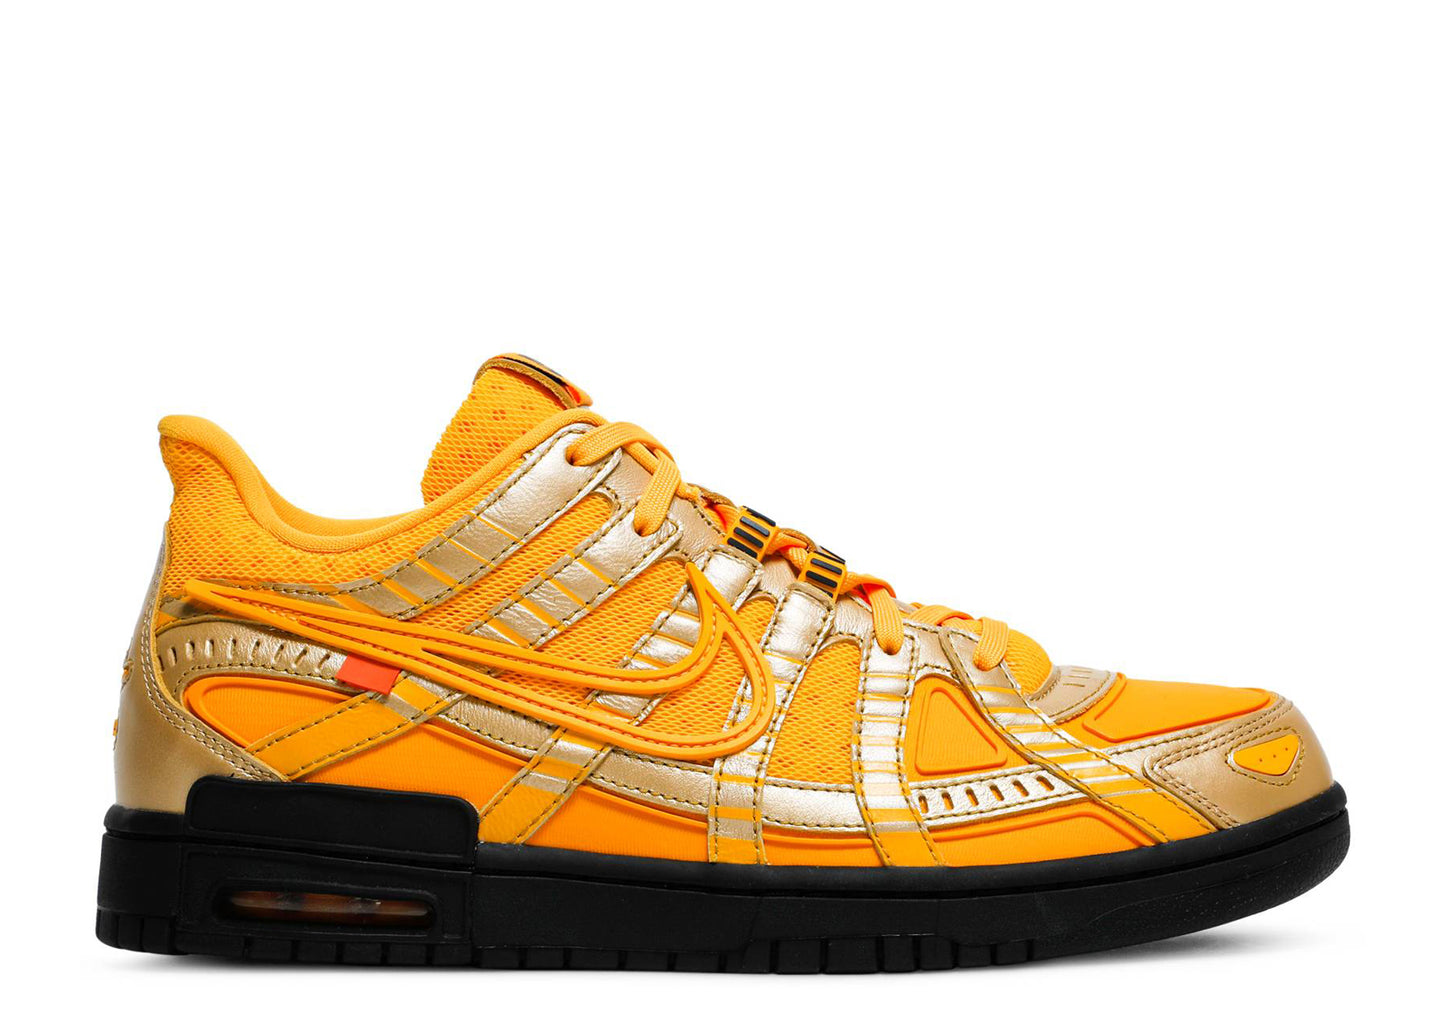 Off White x Nike Air Rubber Dunk "University Gold"